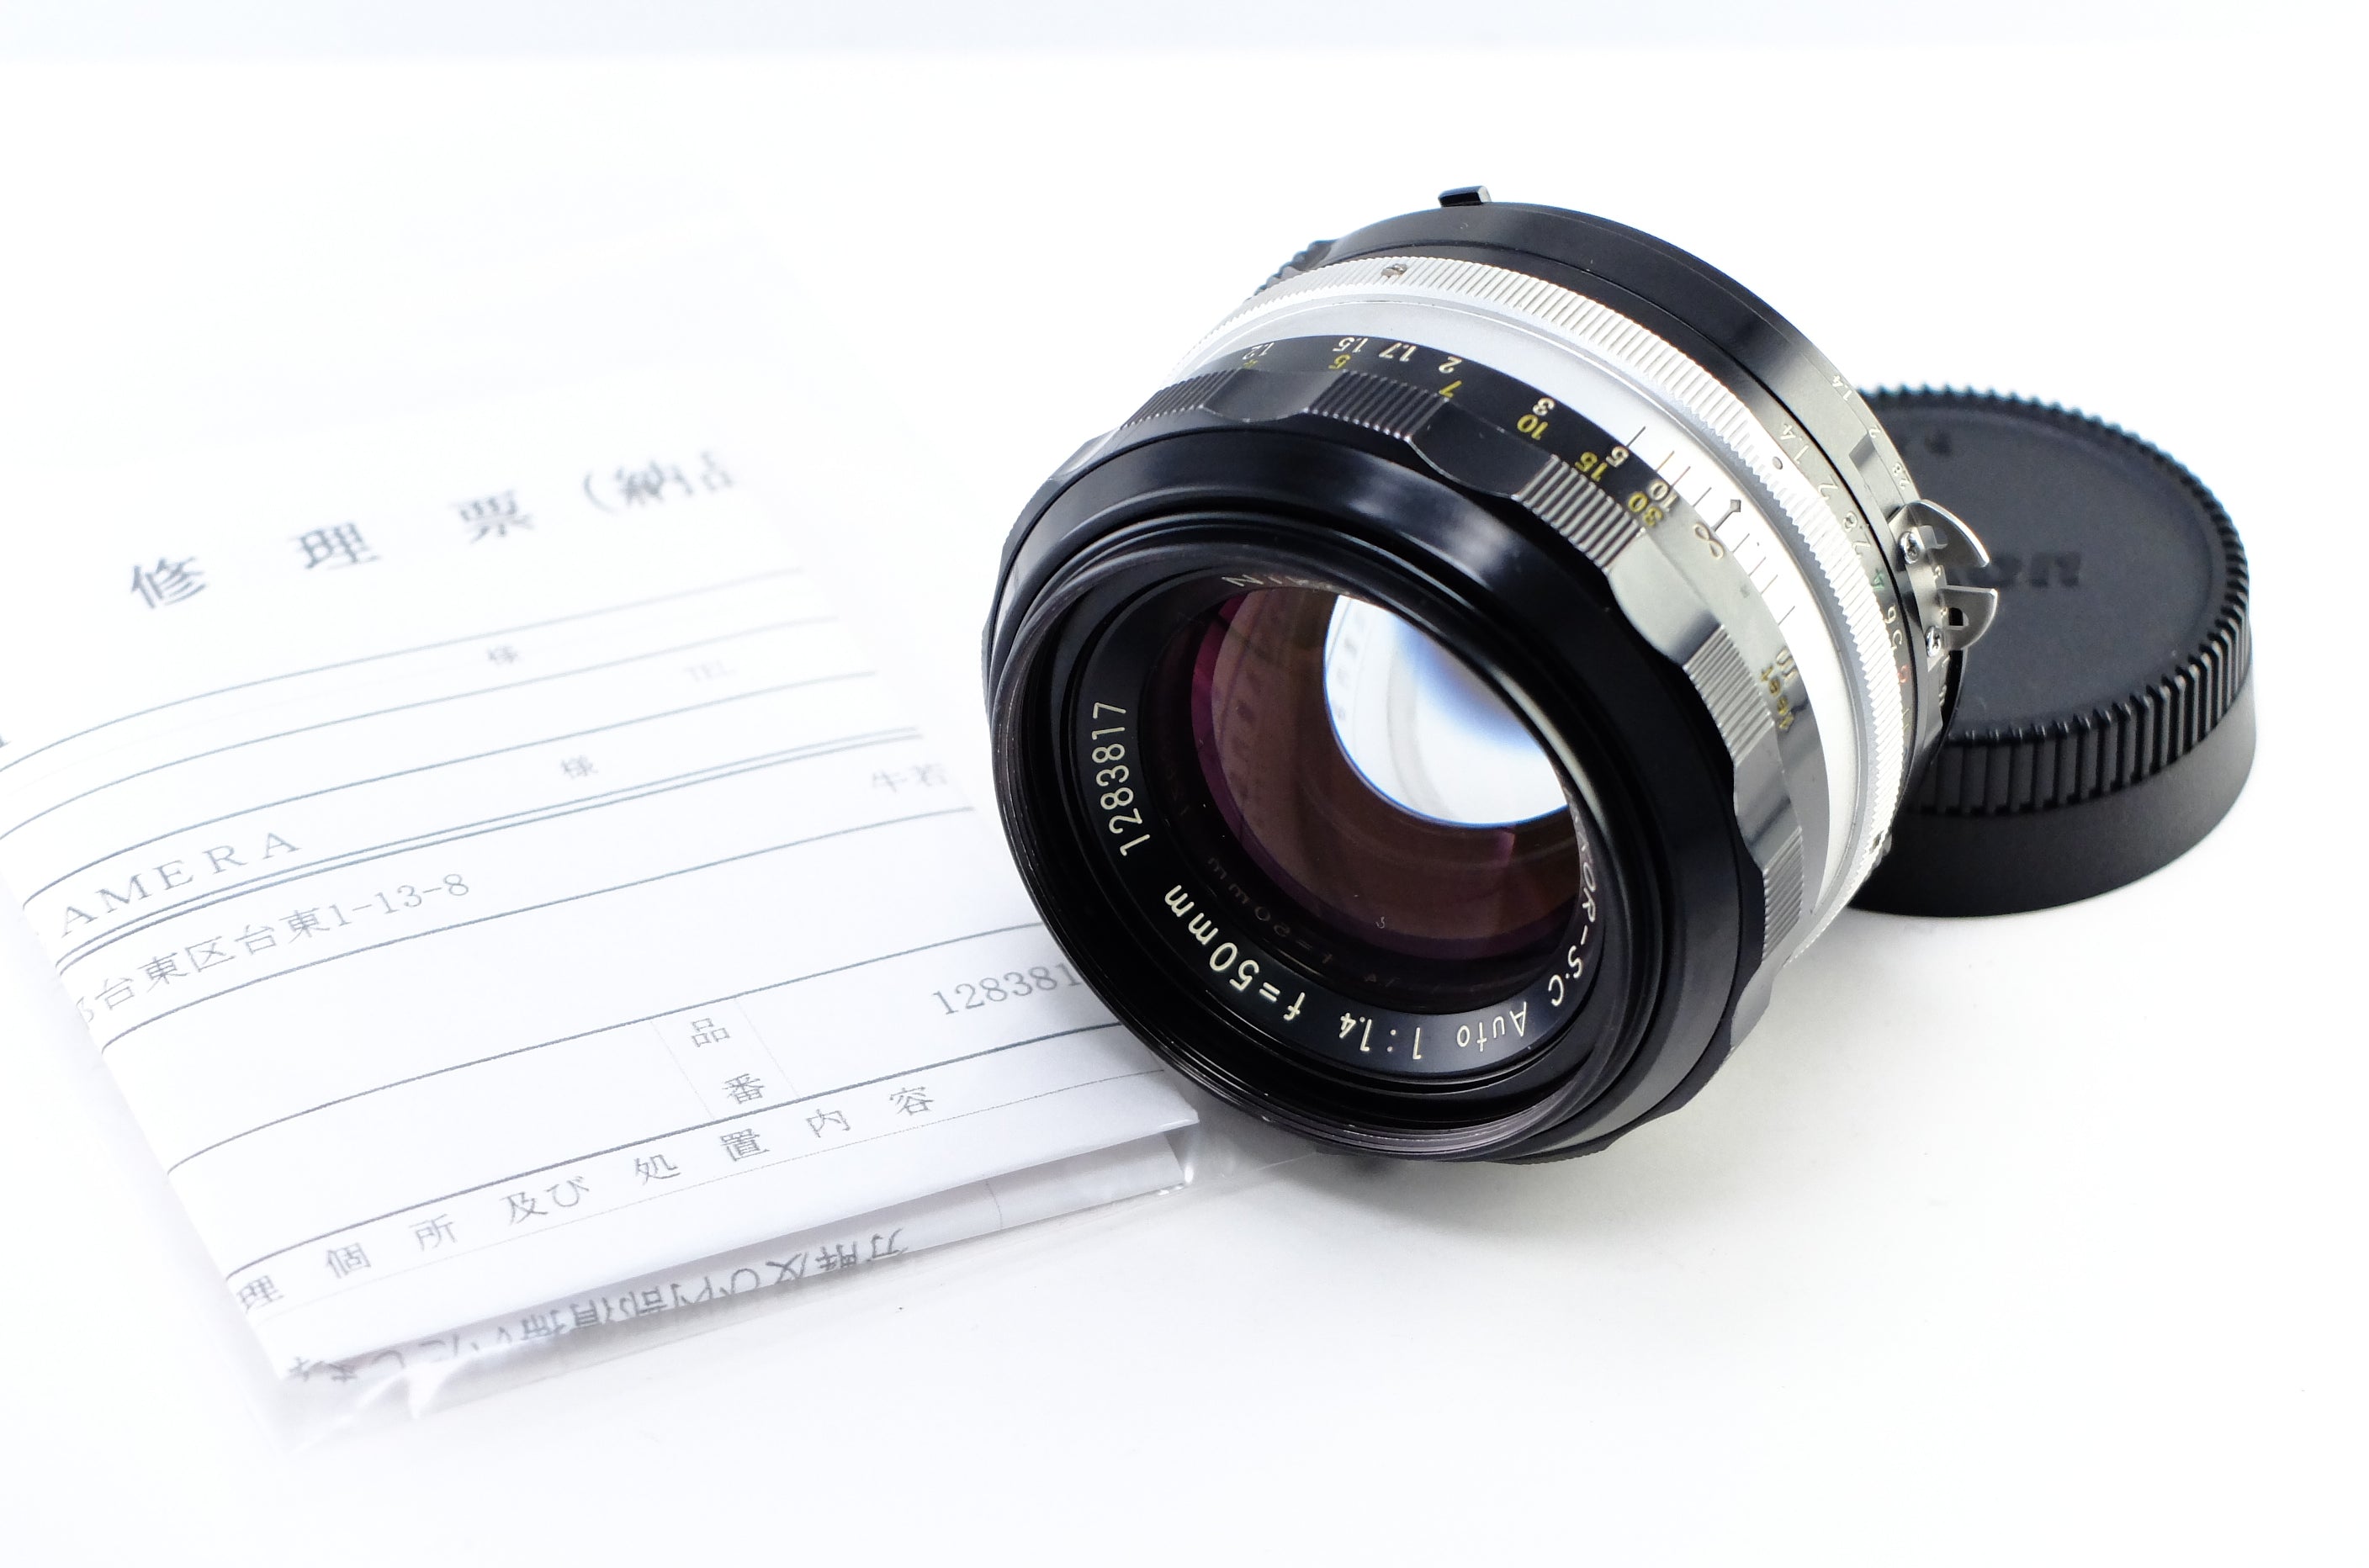 【Nikon】NIKKOR-S.C Auto 50mm F1.4 Ai改 OH済み [ニコンF 